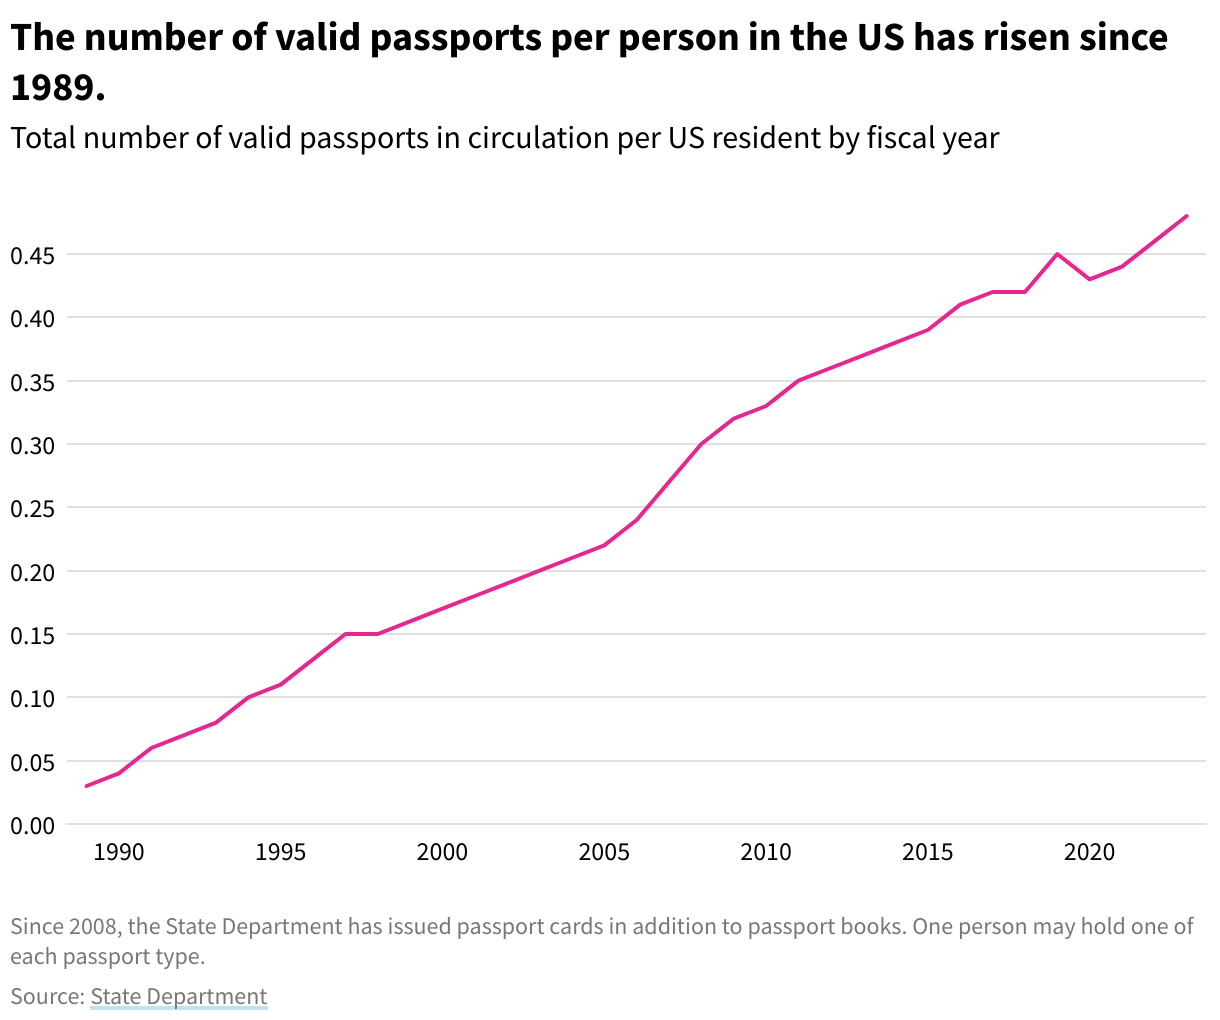 A line chart showing the number of valid passports in circulation per US resident by fiscal year. The line rises consistently from FY 1989 to 2023.